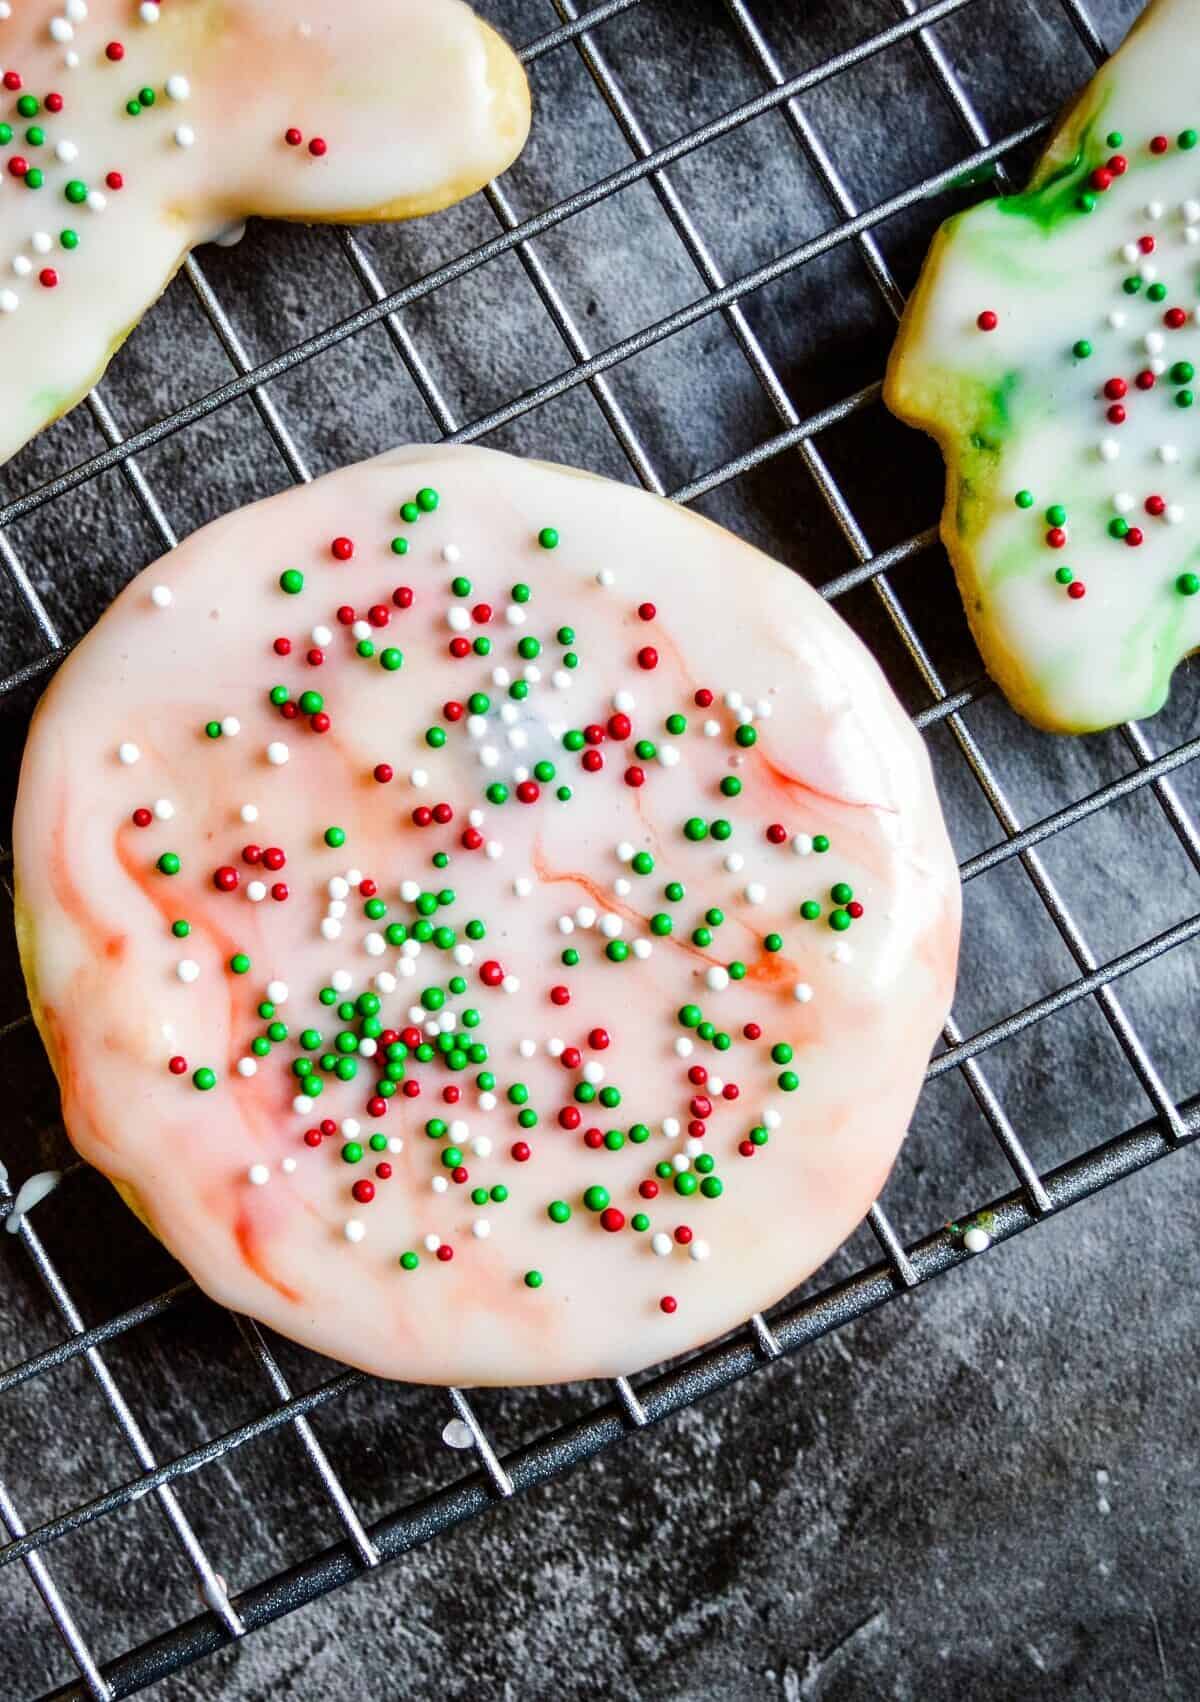  Prepare to be amazed by these rockin' cookies